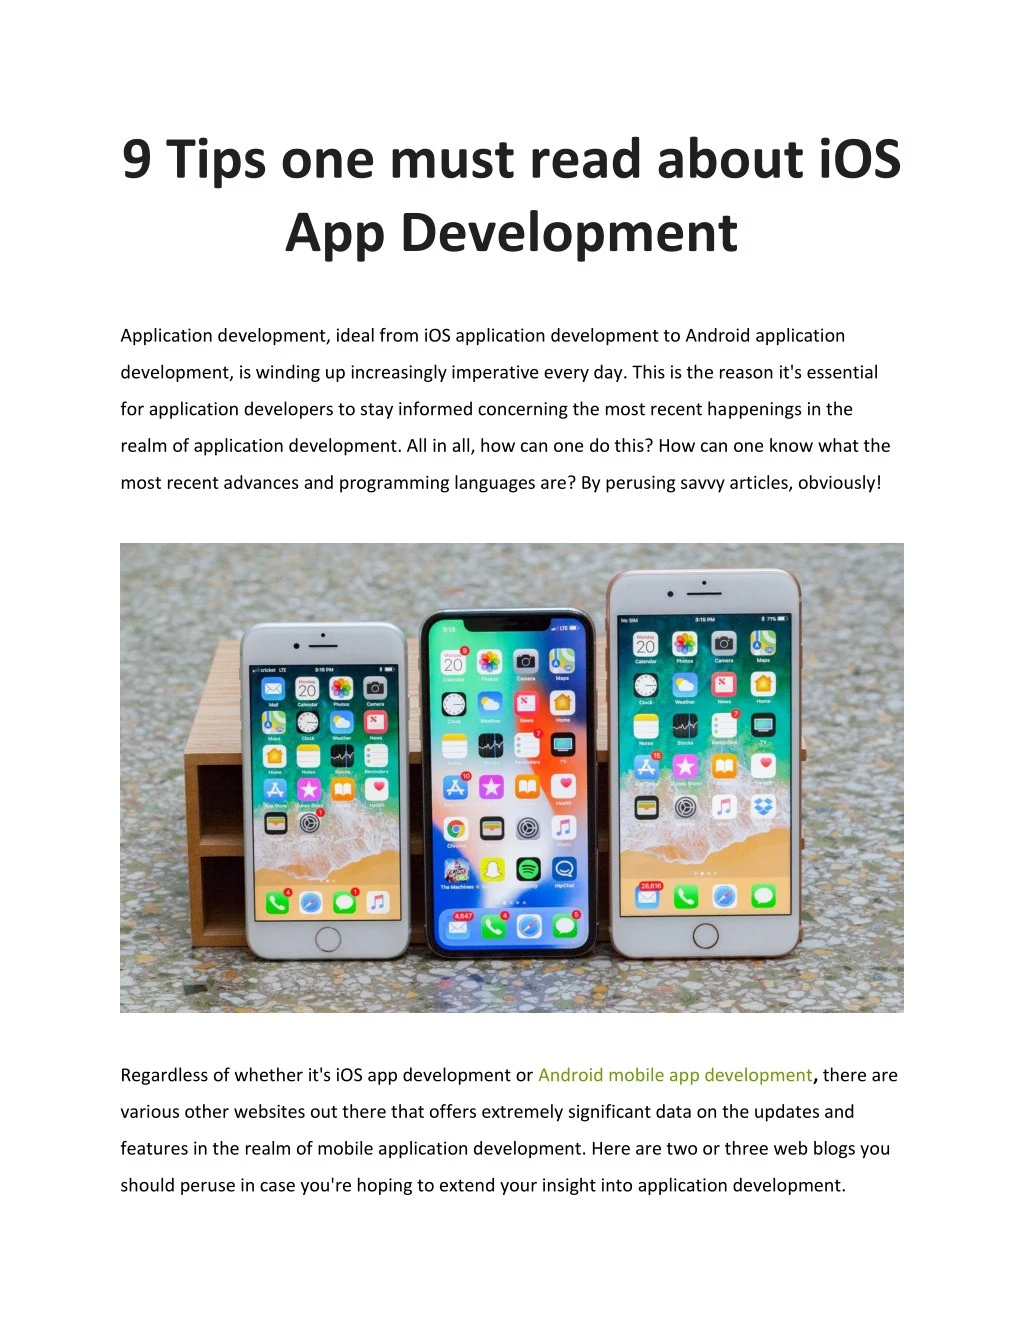 9 tips one must read about ios app development